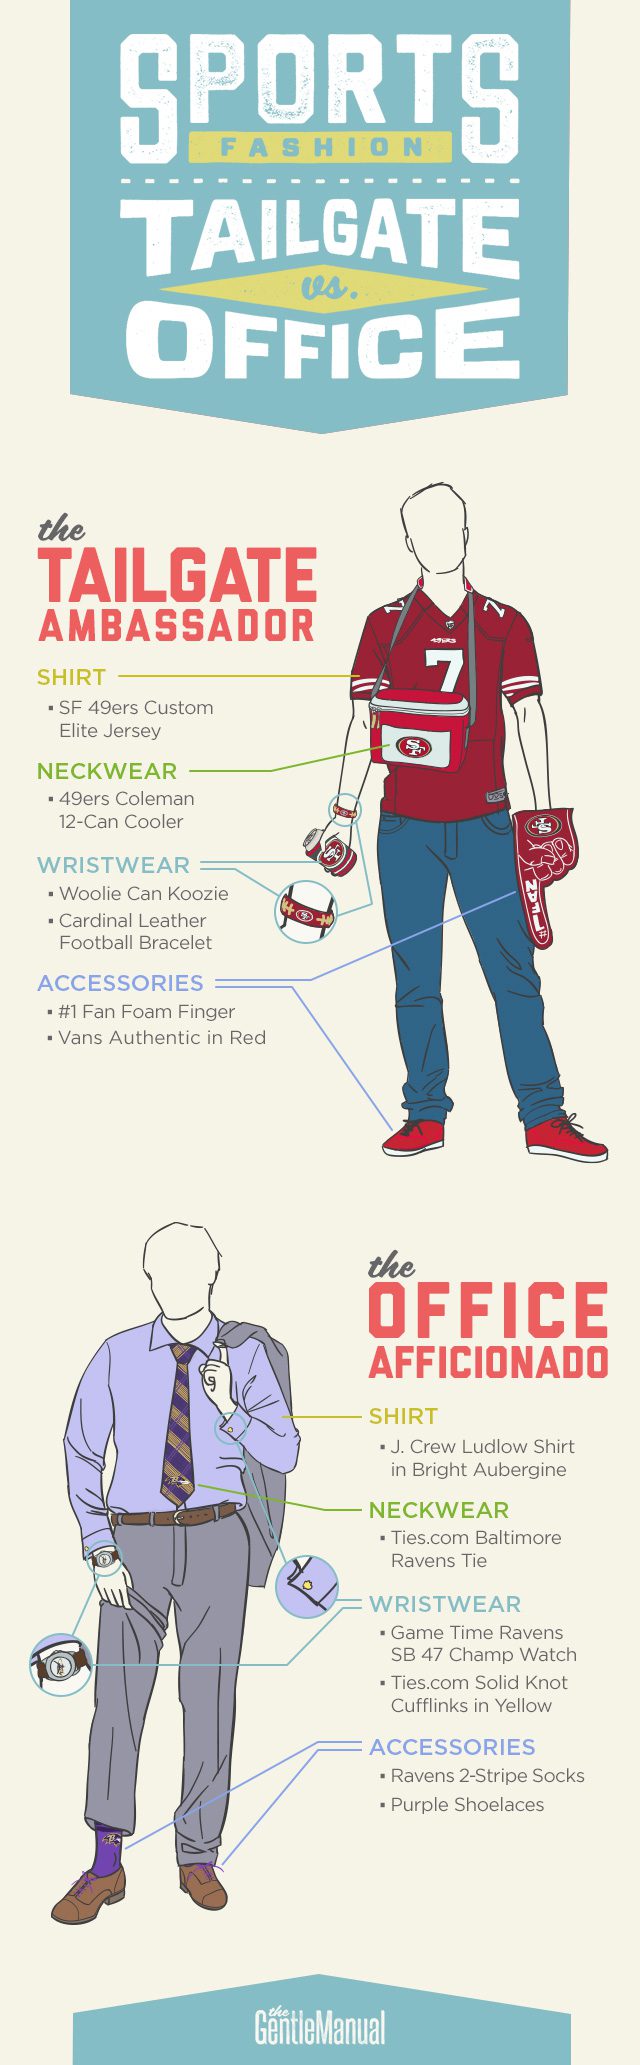 Sports Fashion: Tailgate vs. Office Infographic